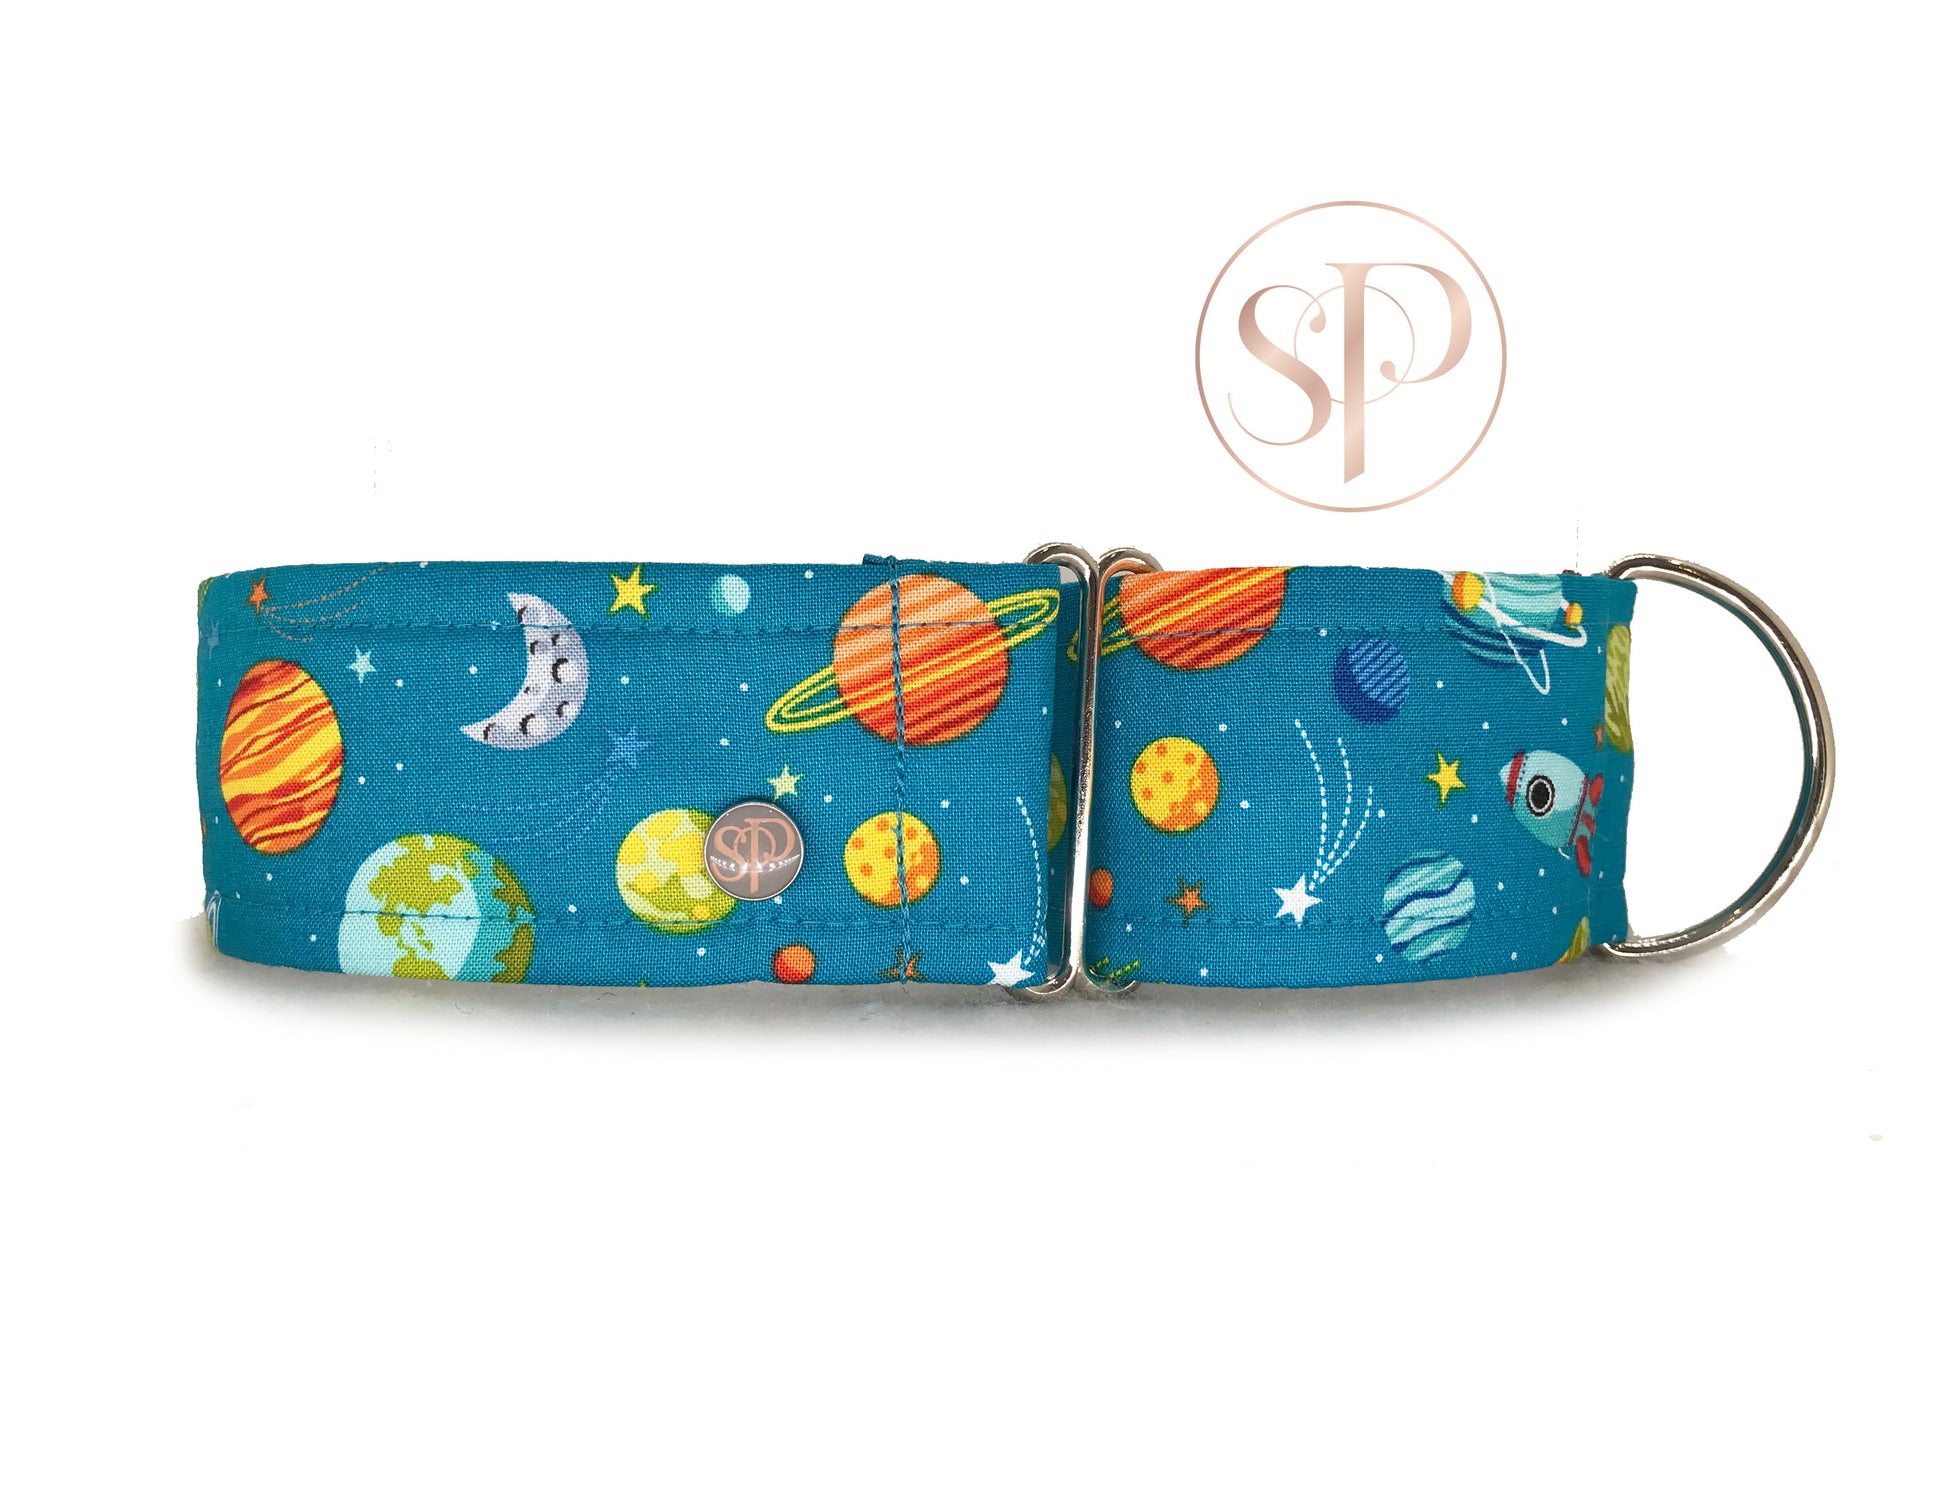 Cosmic Cooper Martingale Dog Collar with silver hardware